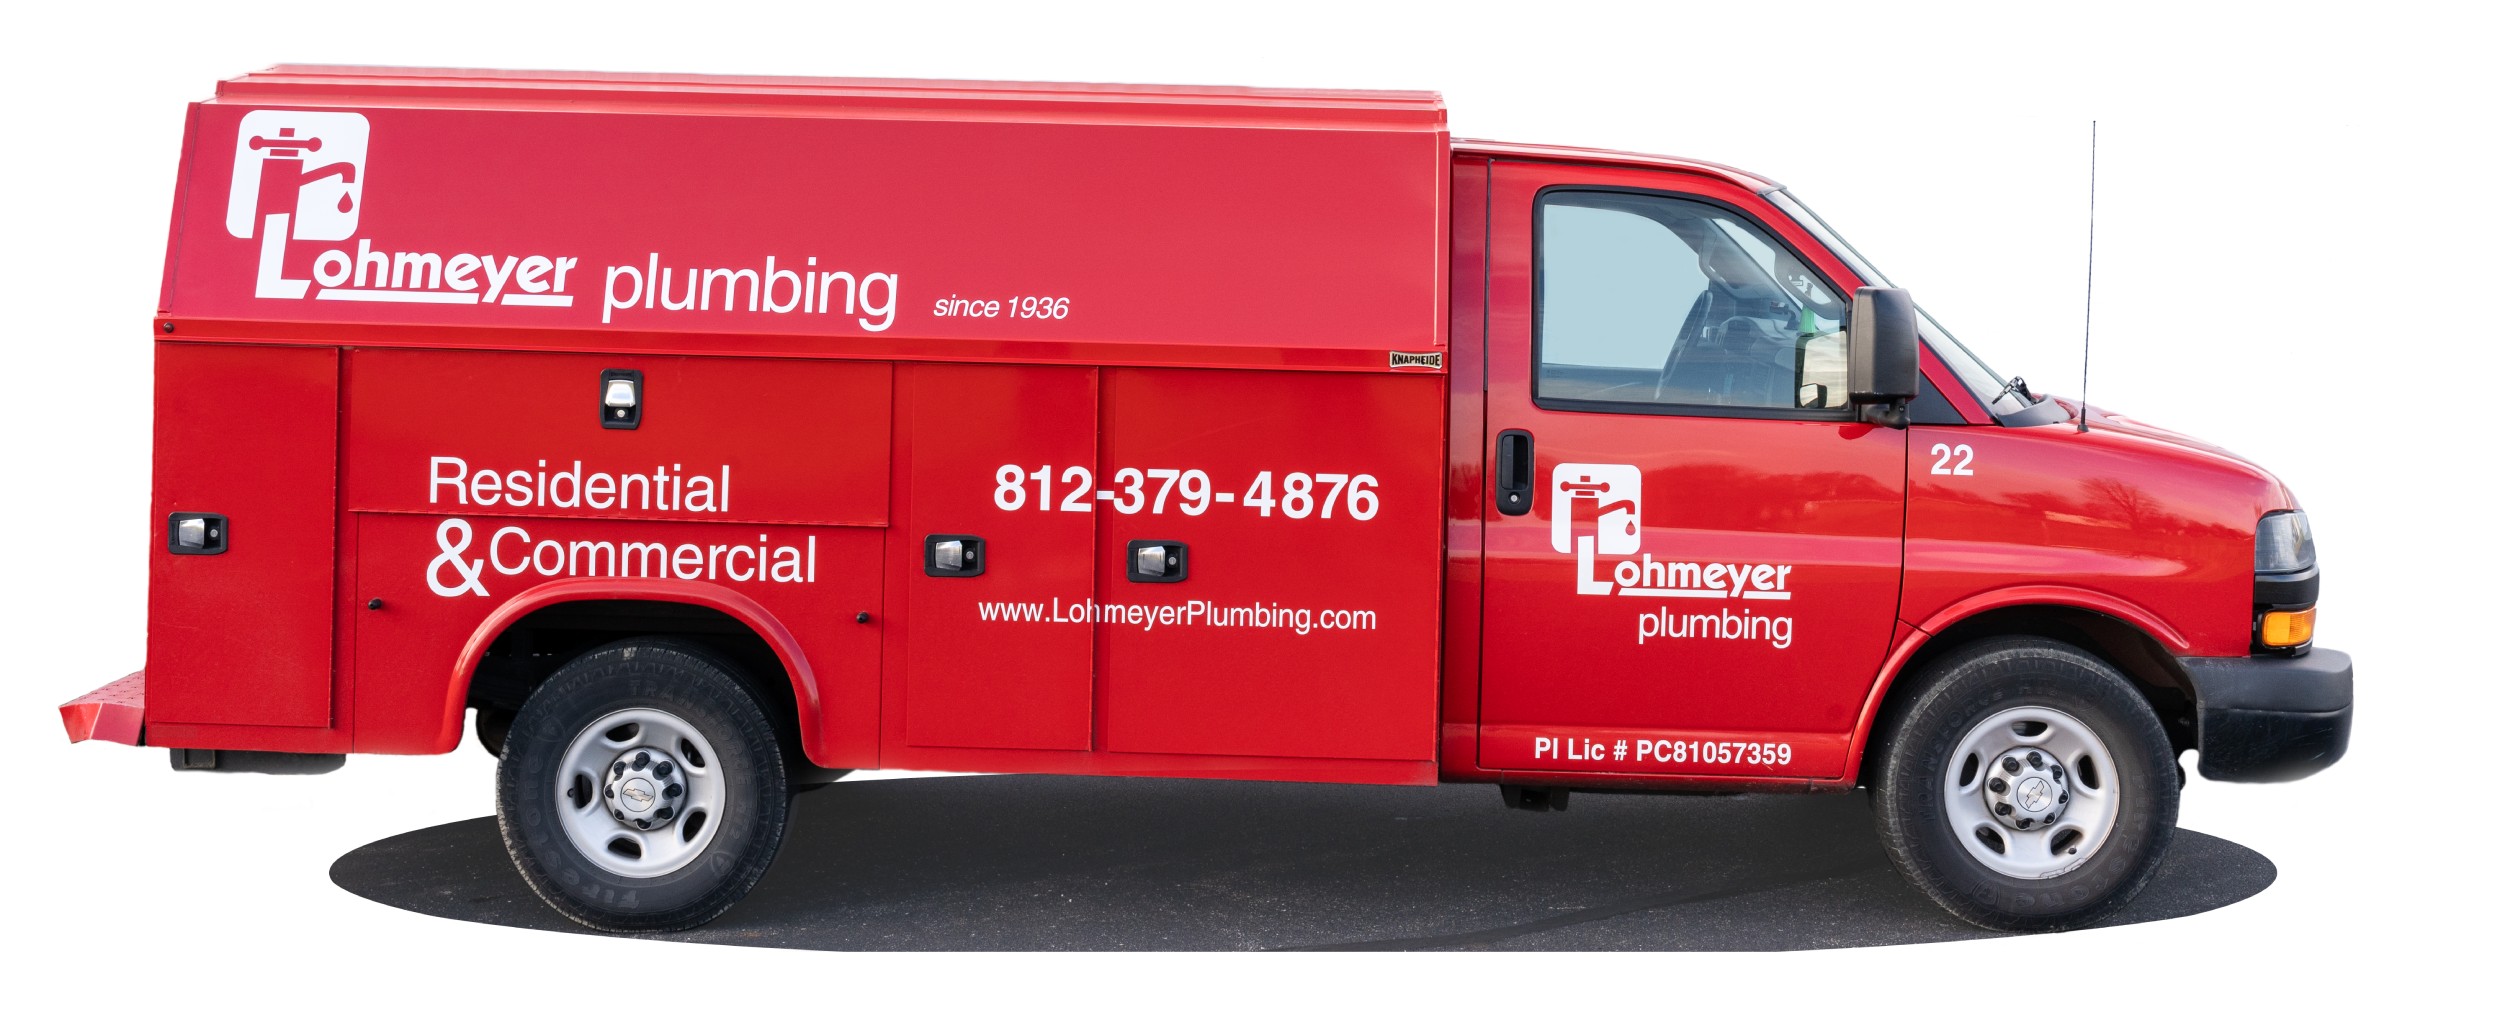 Red Lohmeyer Plumbing truck, viewed from the side